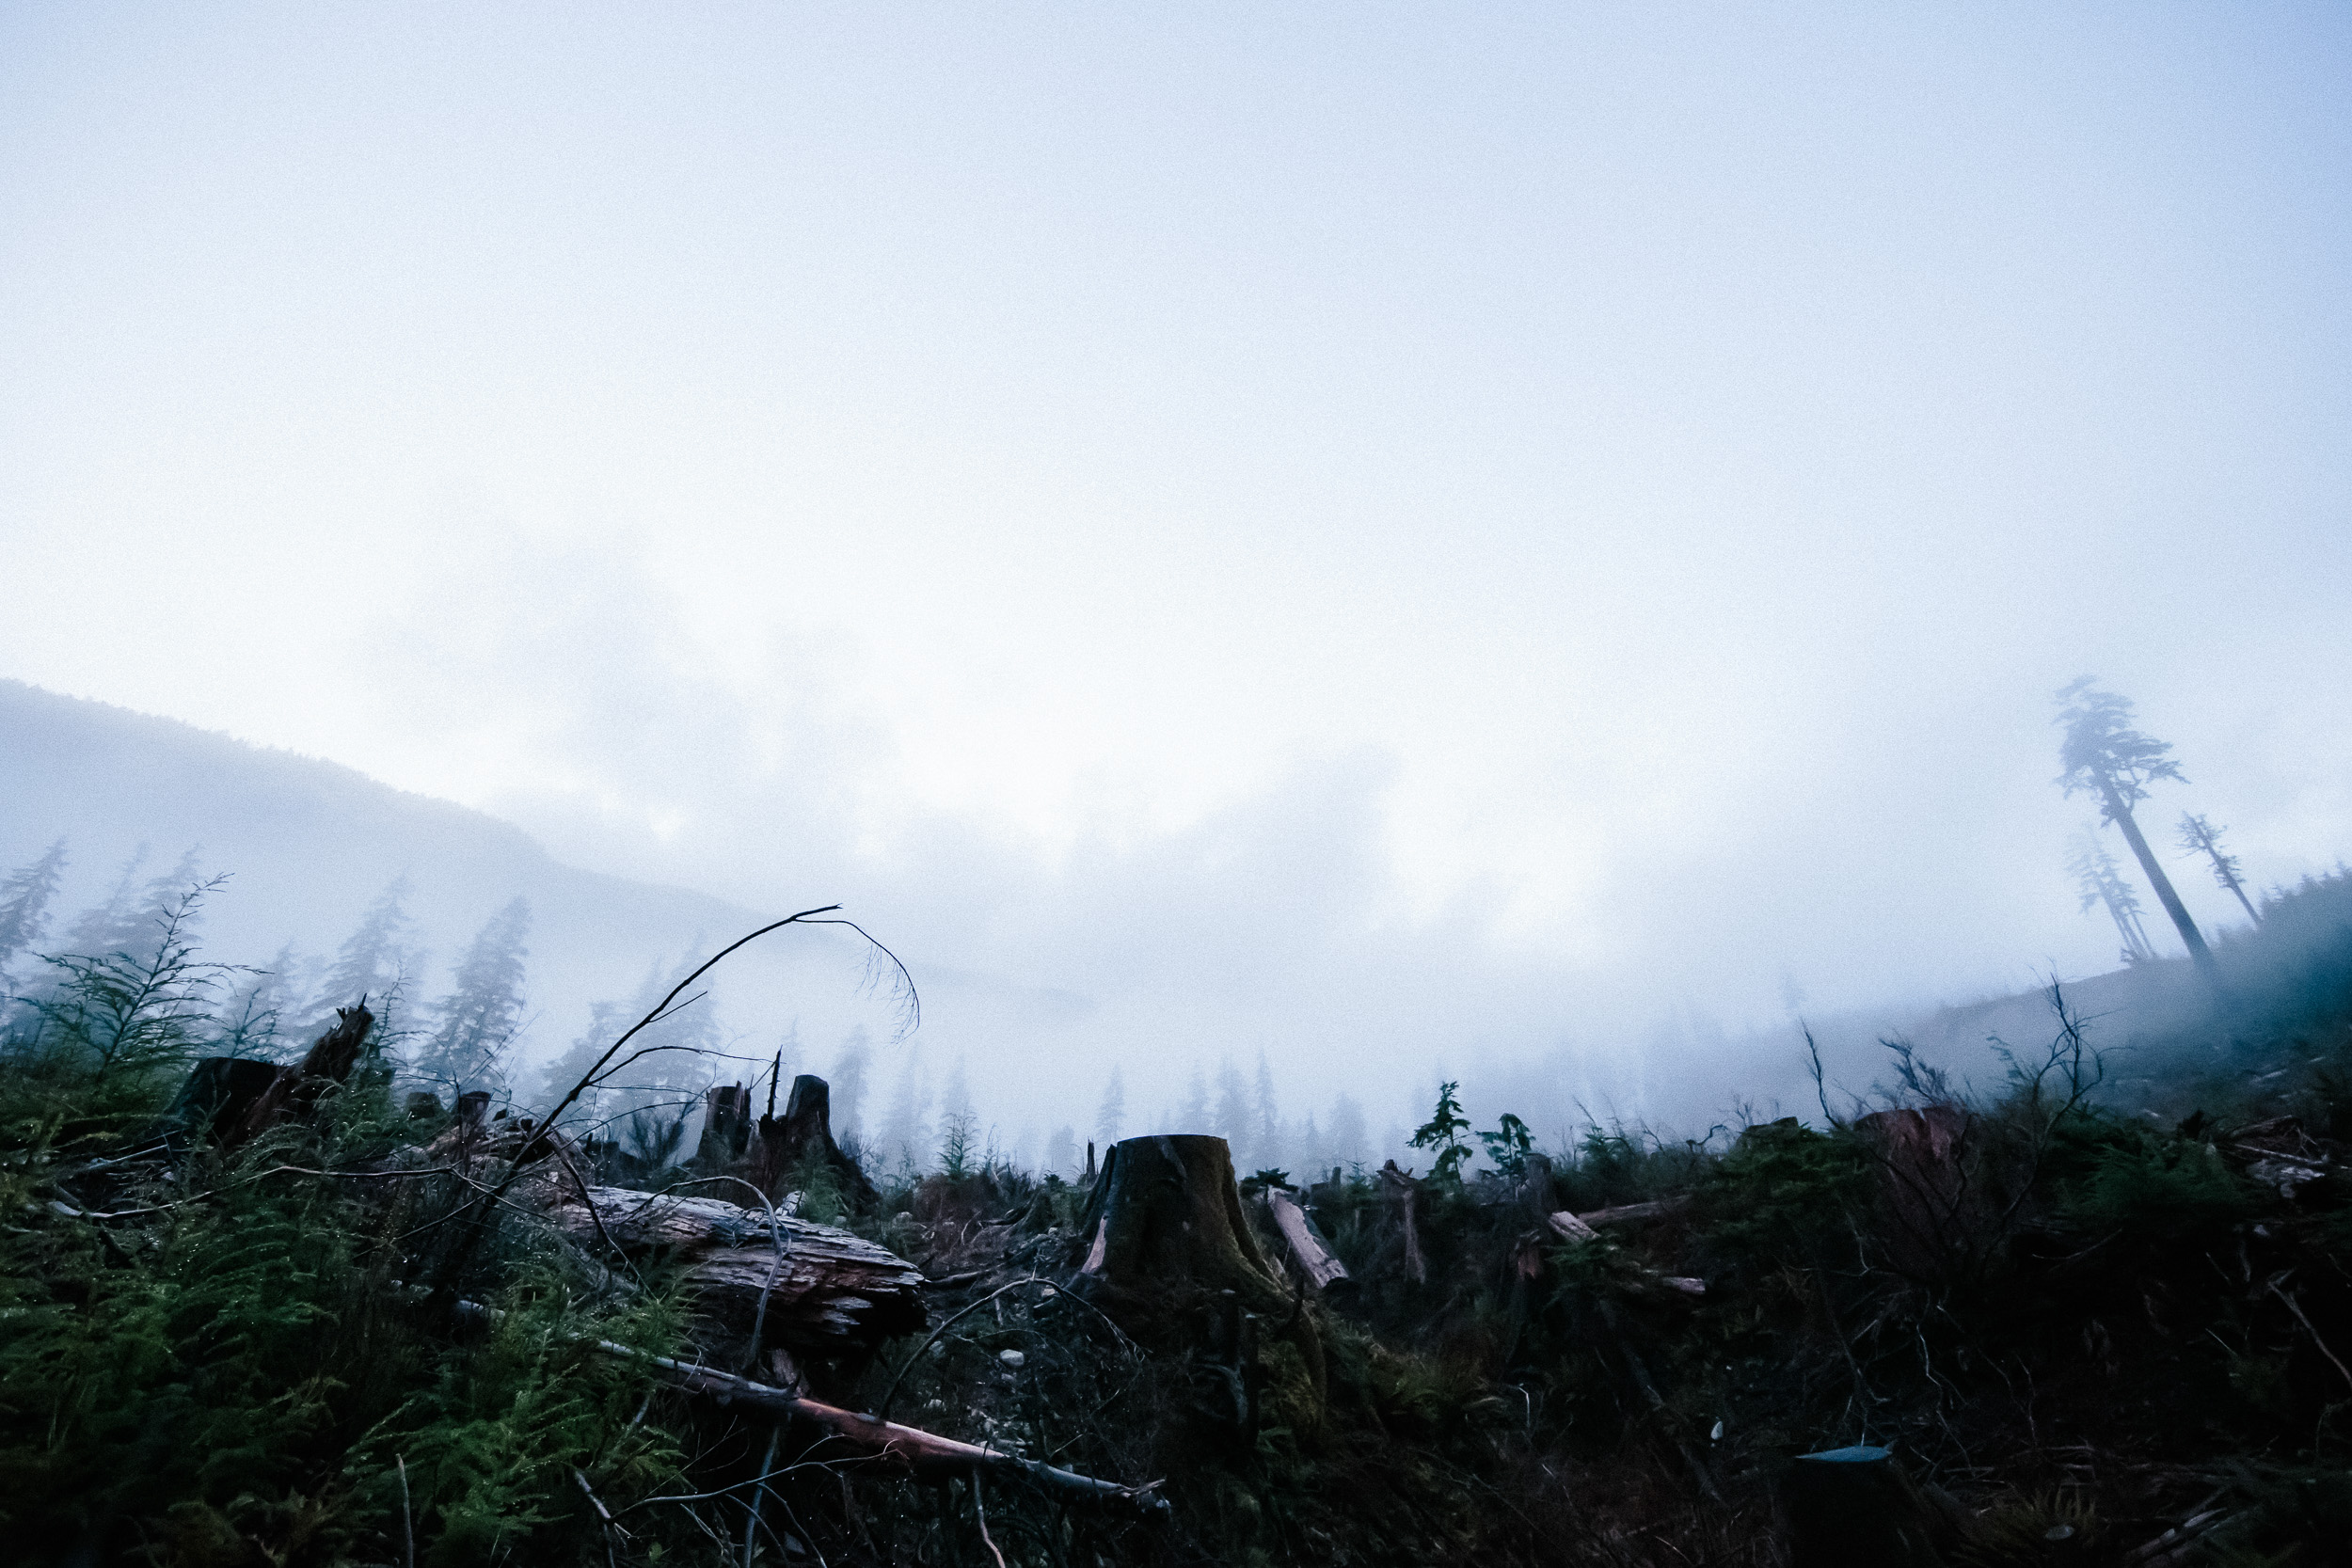 15-Vancouver-Island-BC-Old-Growth-Forests-Logging-Port-Renfrew-Big-Lonely-Doug.jpg